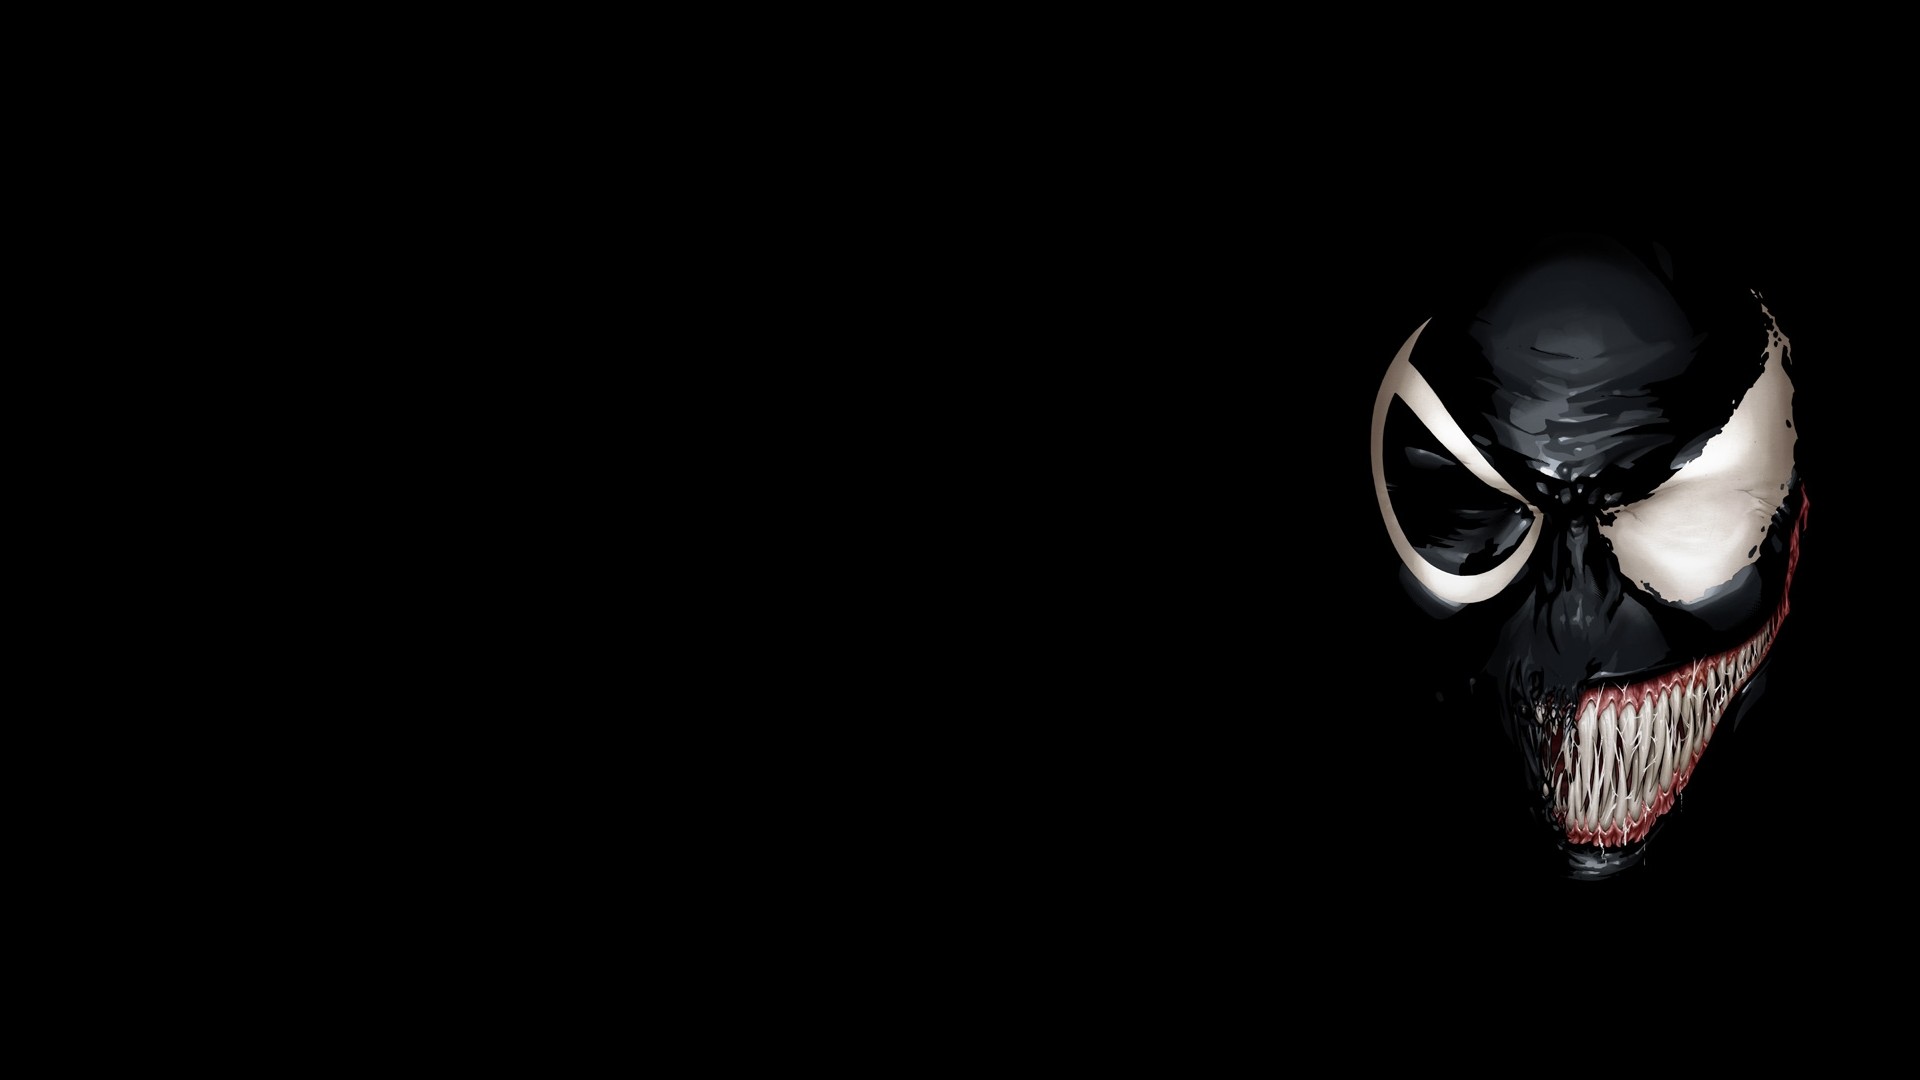 Search Results for venom wallpaper hd Adorable Wallpapers